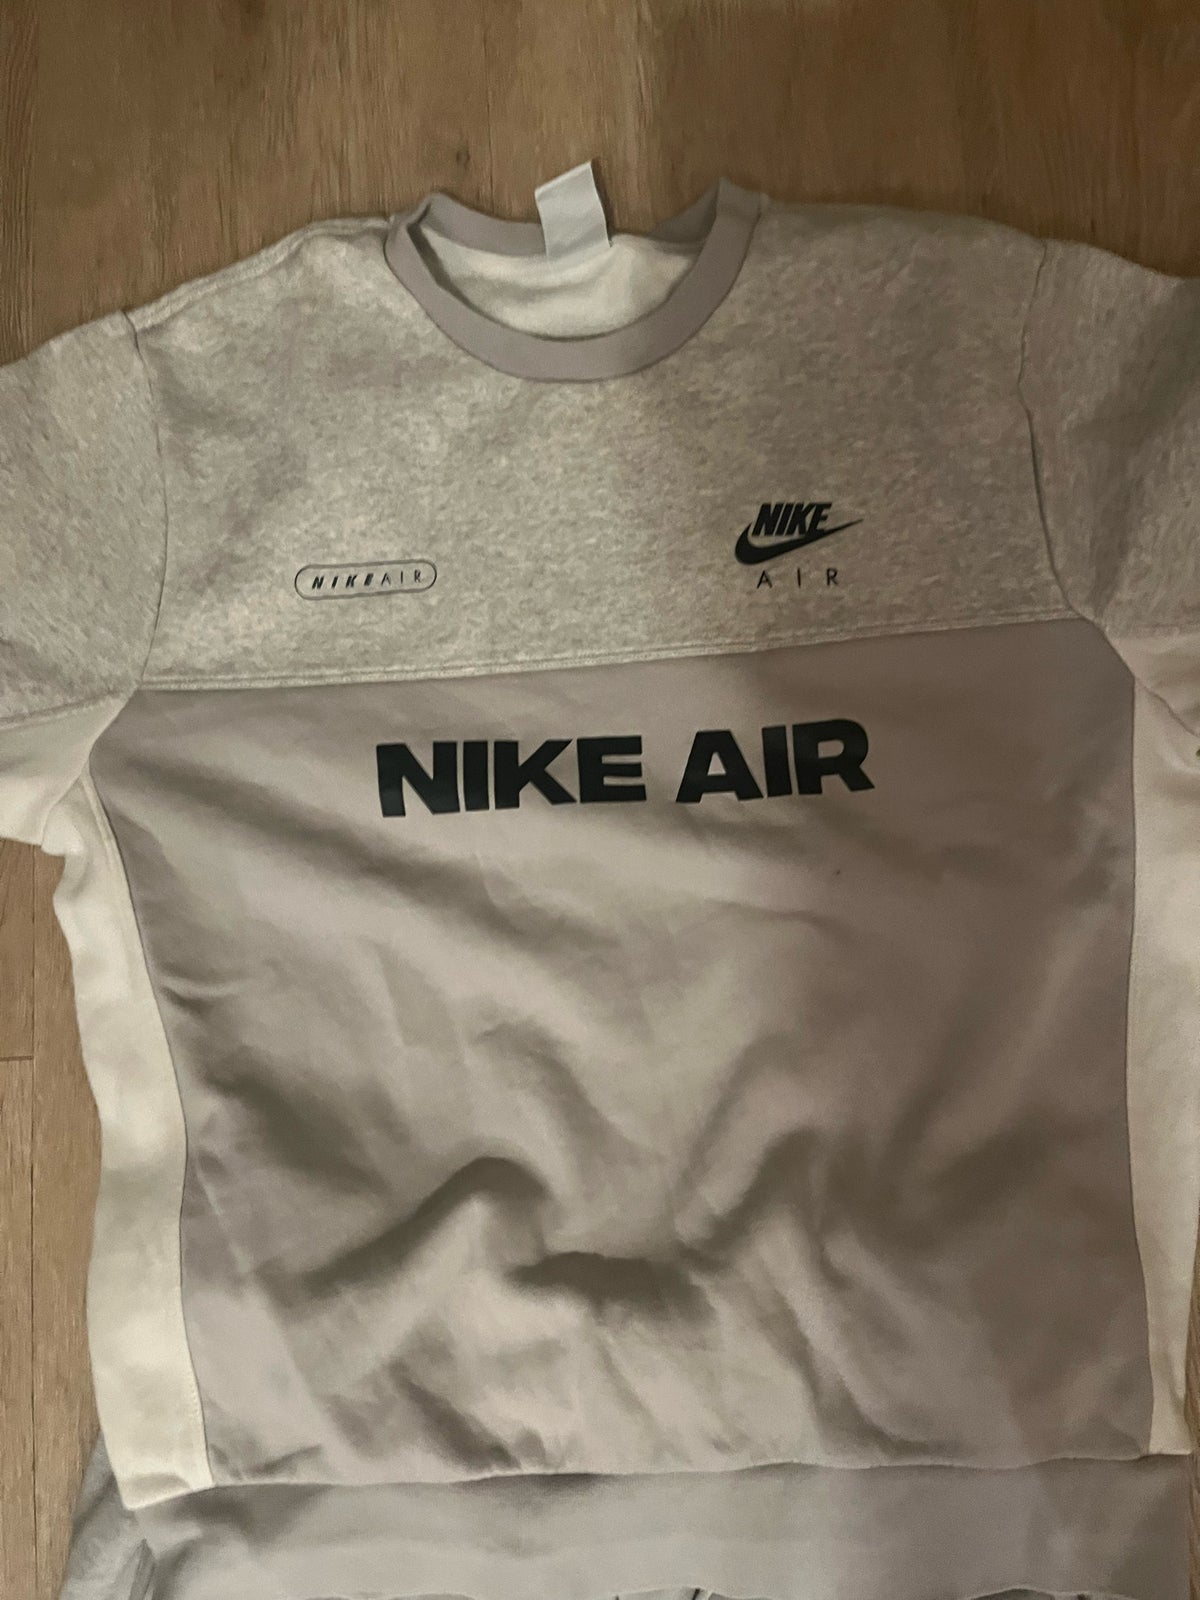 Andet, Nike, str. Small